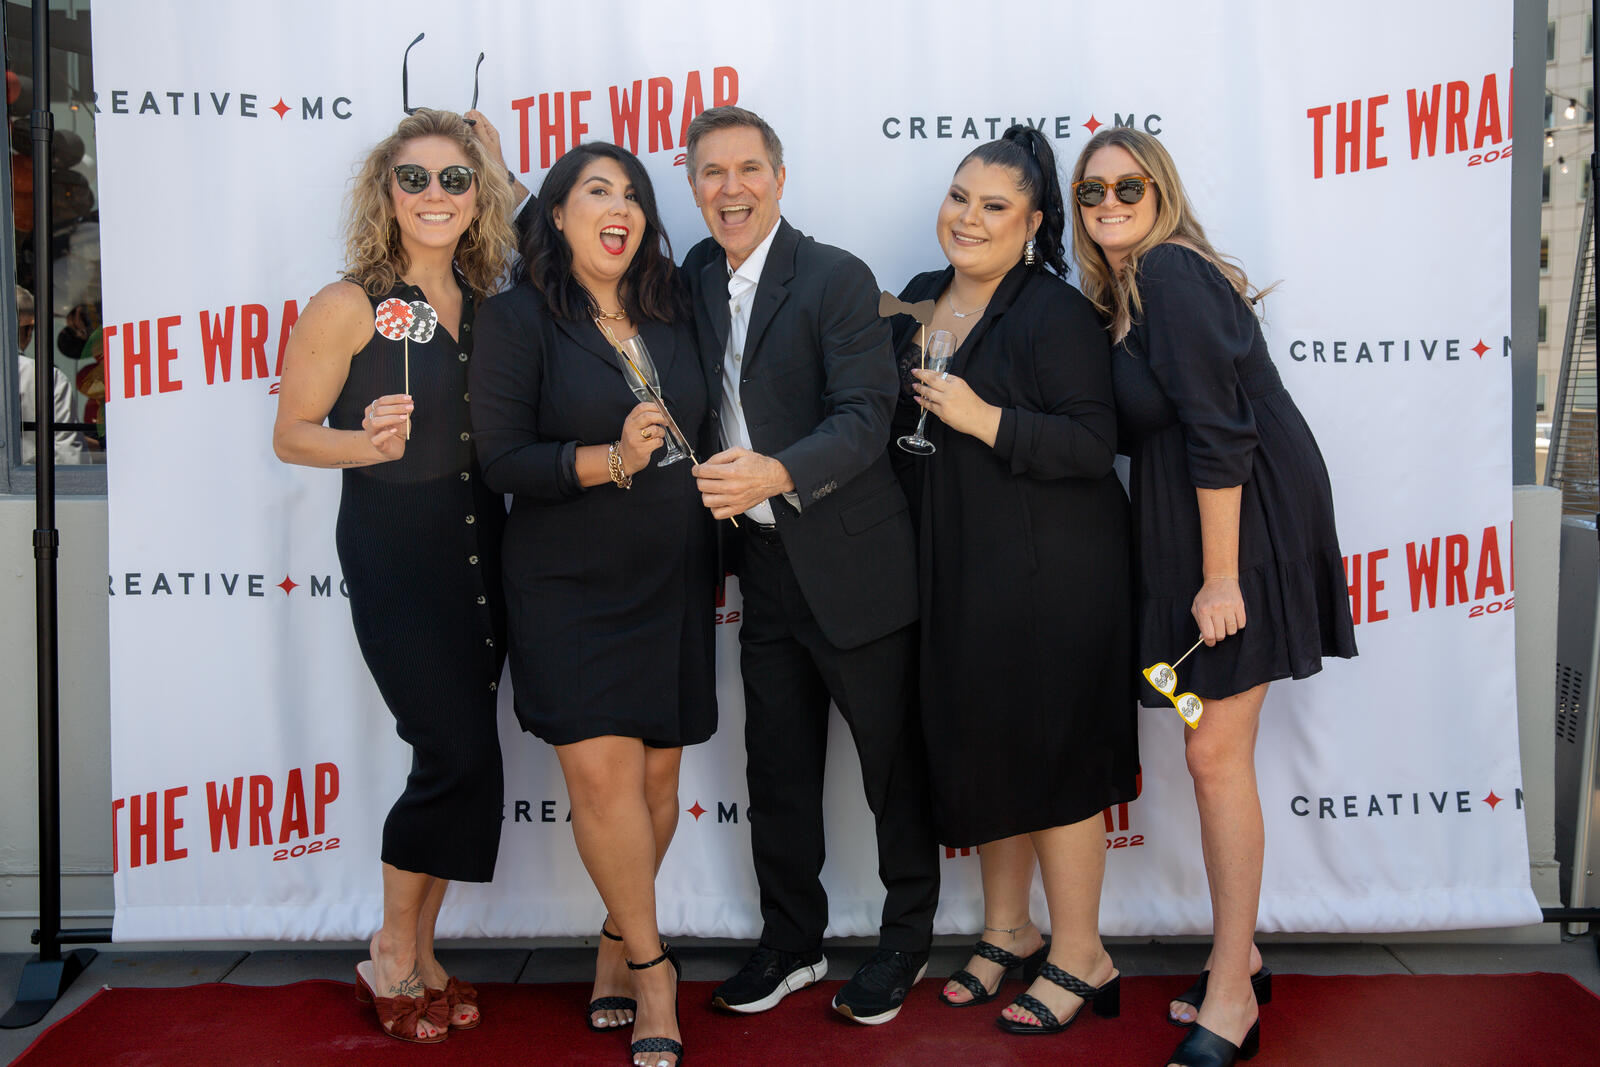 Several members of the Brand Stylist team hit the red carpet with Hawk: (L to R) Lisa Gruzas, Mena Trigueros, Tatiana Gonzalez, and Jackie Gregoire